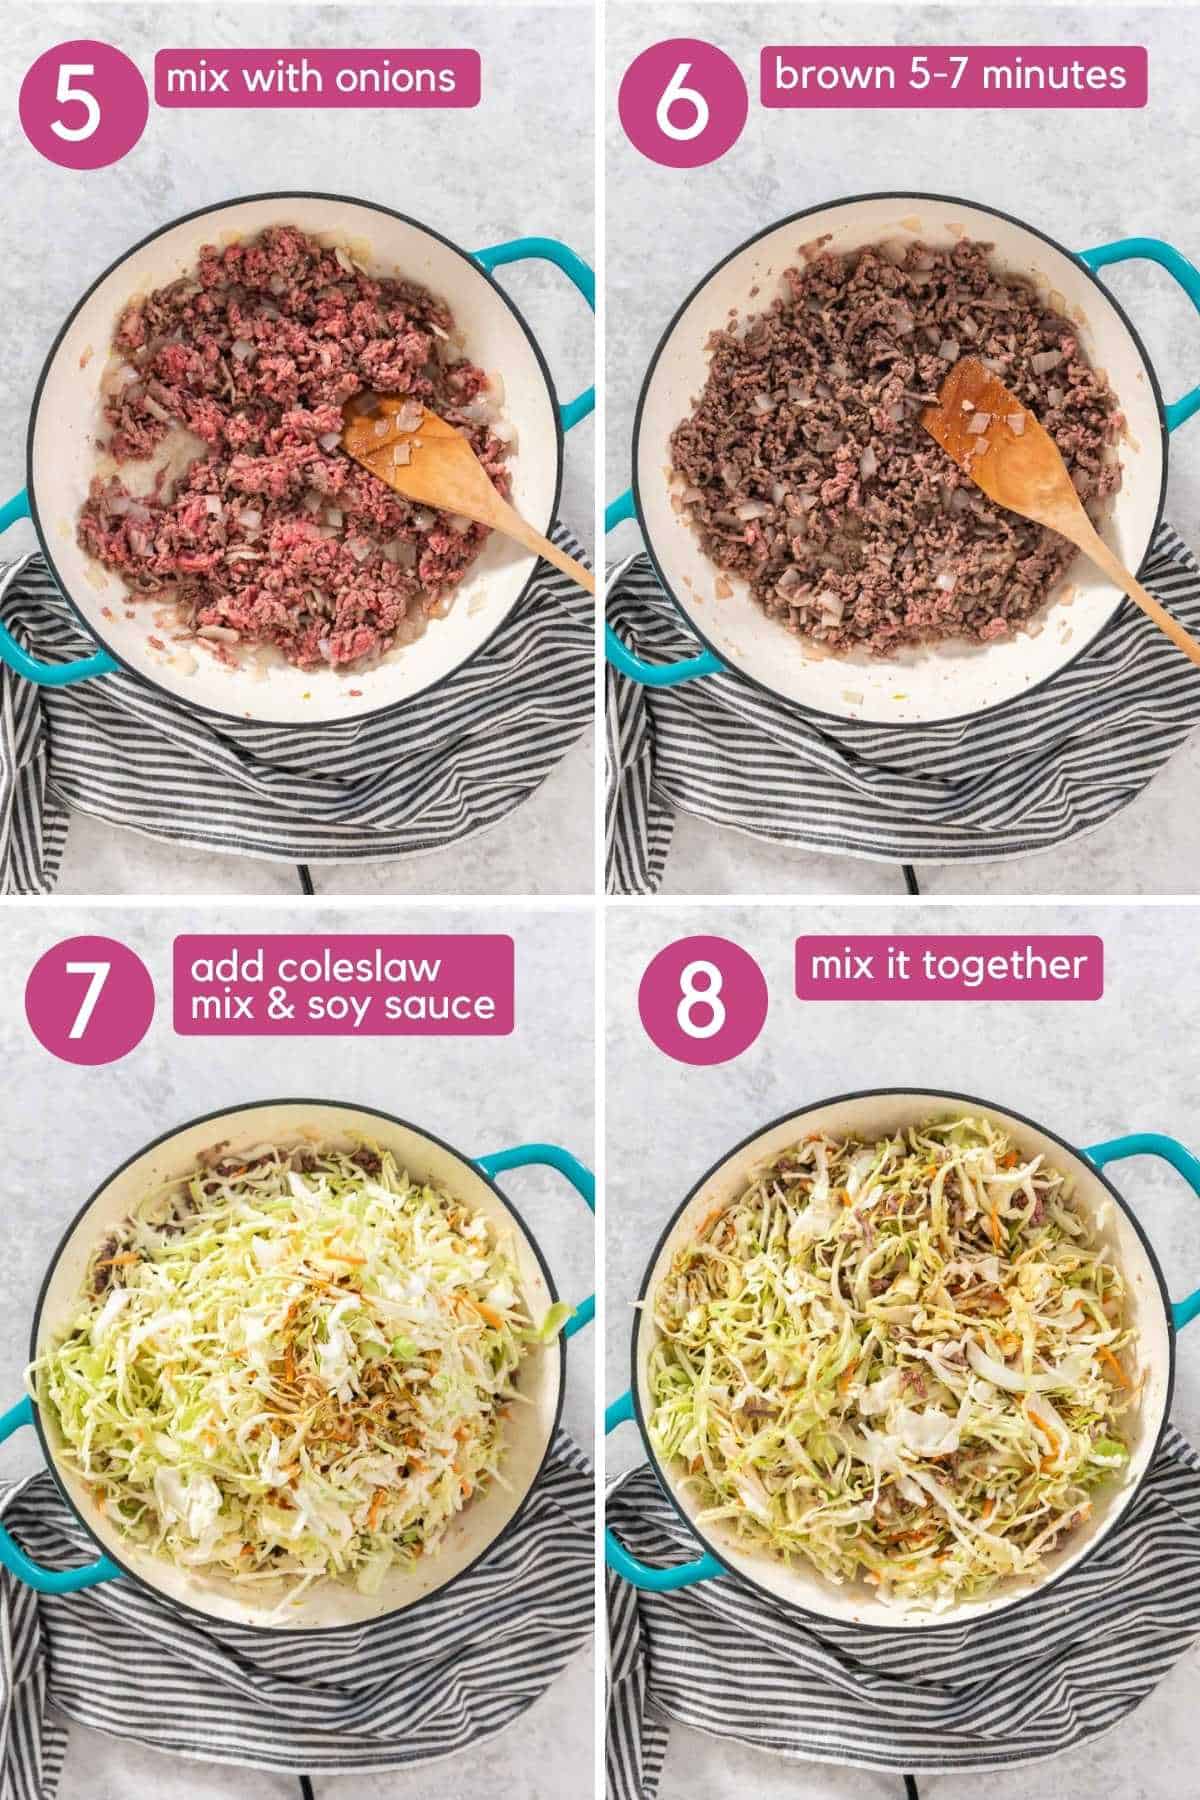 Browning ground beef, then adding shredded cabbage.